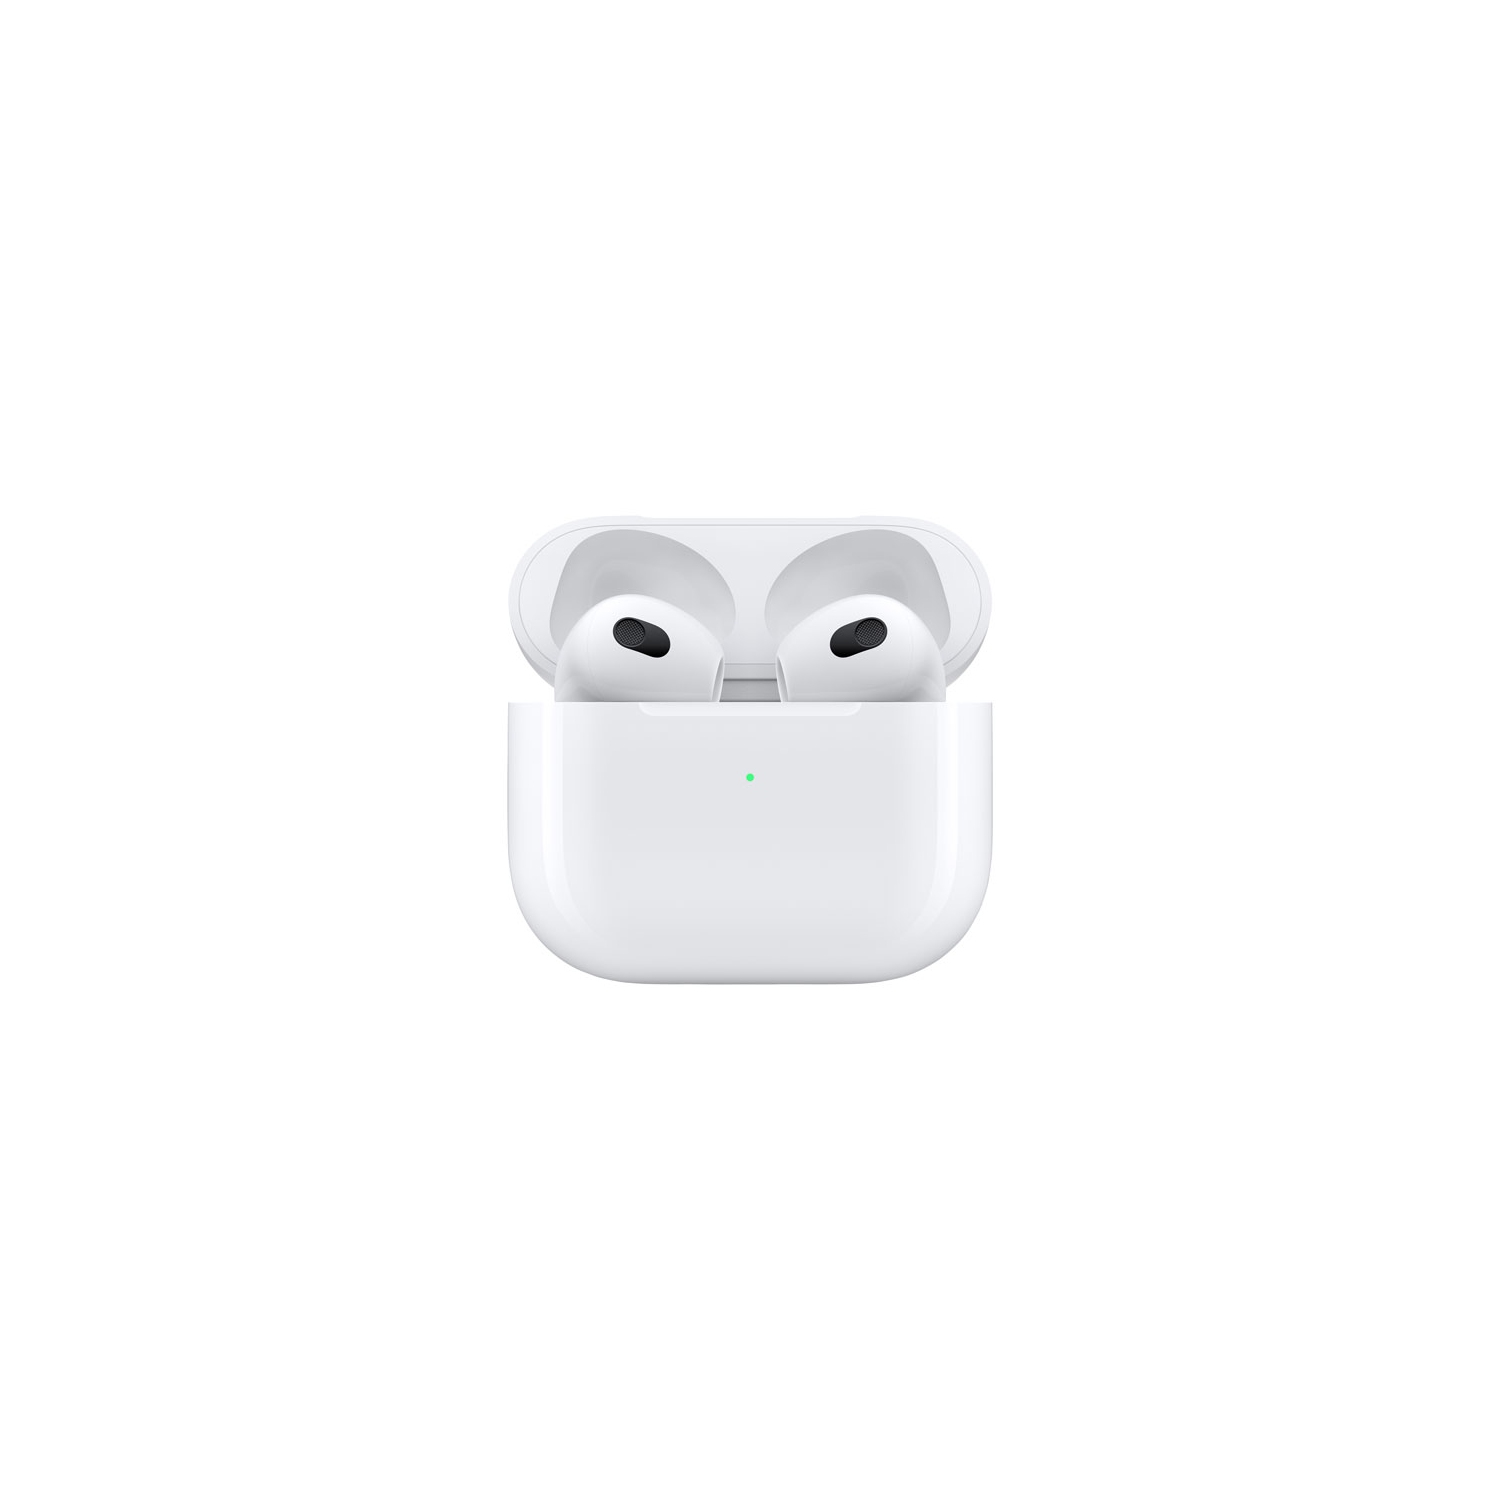 Refurbished (Good) - Apple AirPods In-Ear Truly Wireless Headphones (3rd Generation) with MagSafe Charging Case - White